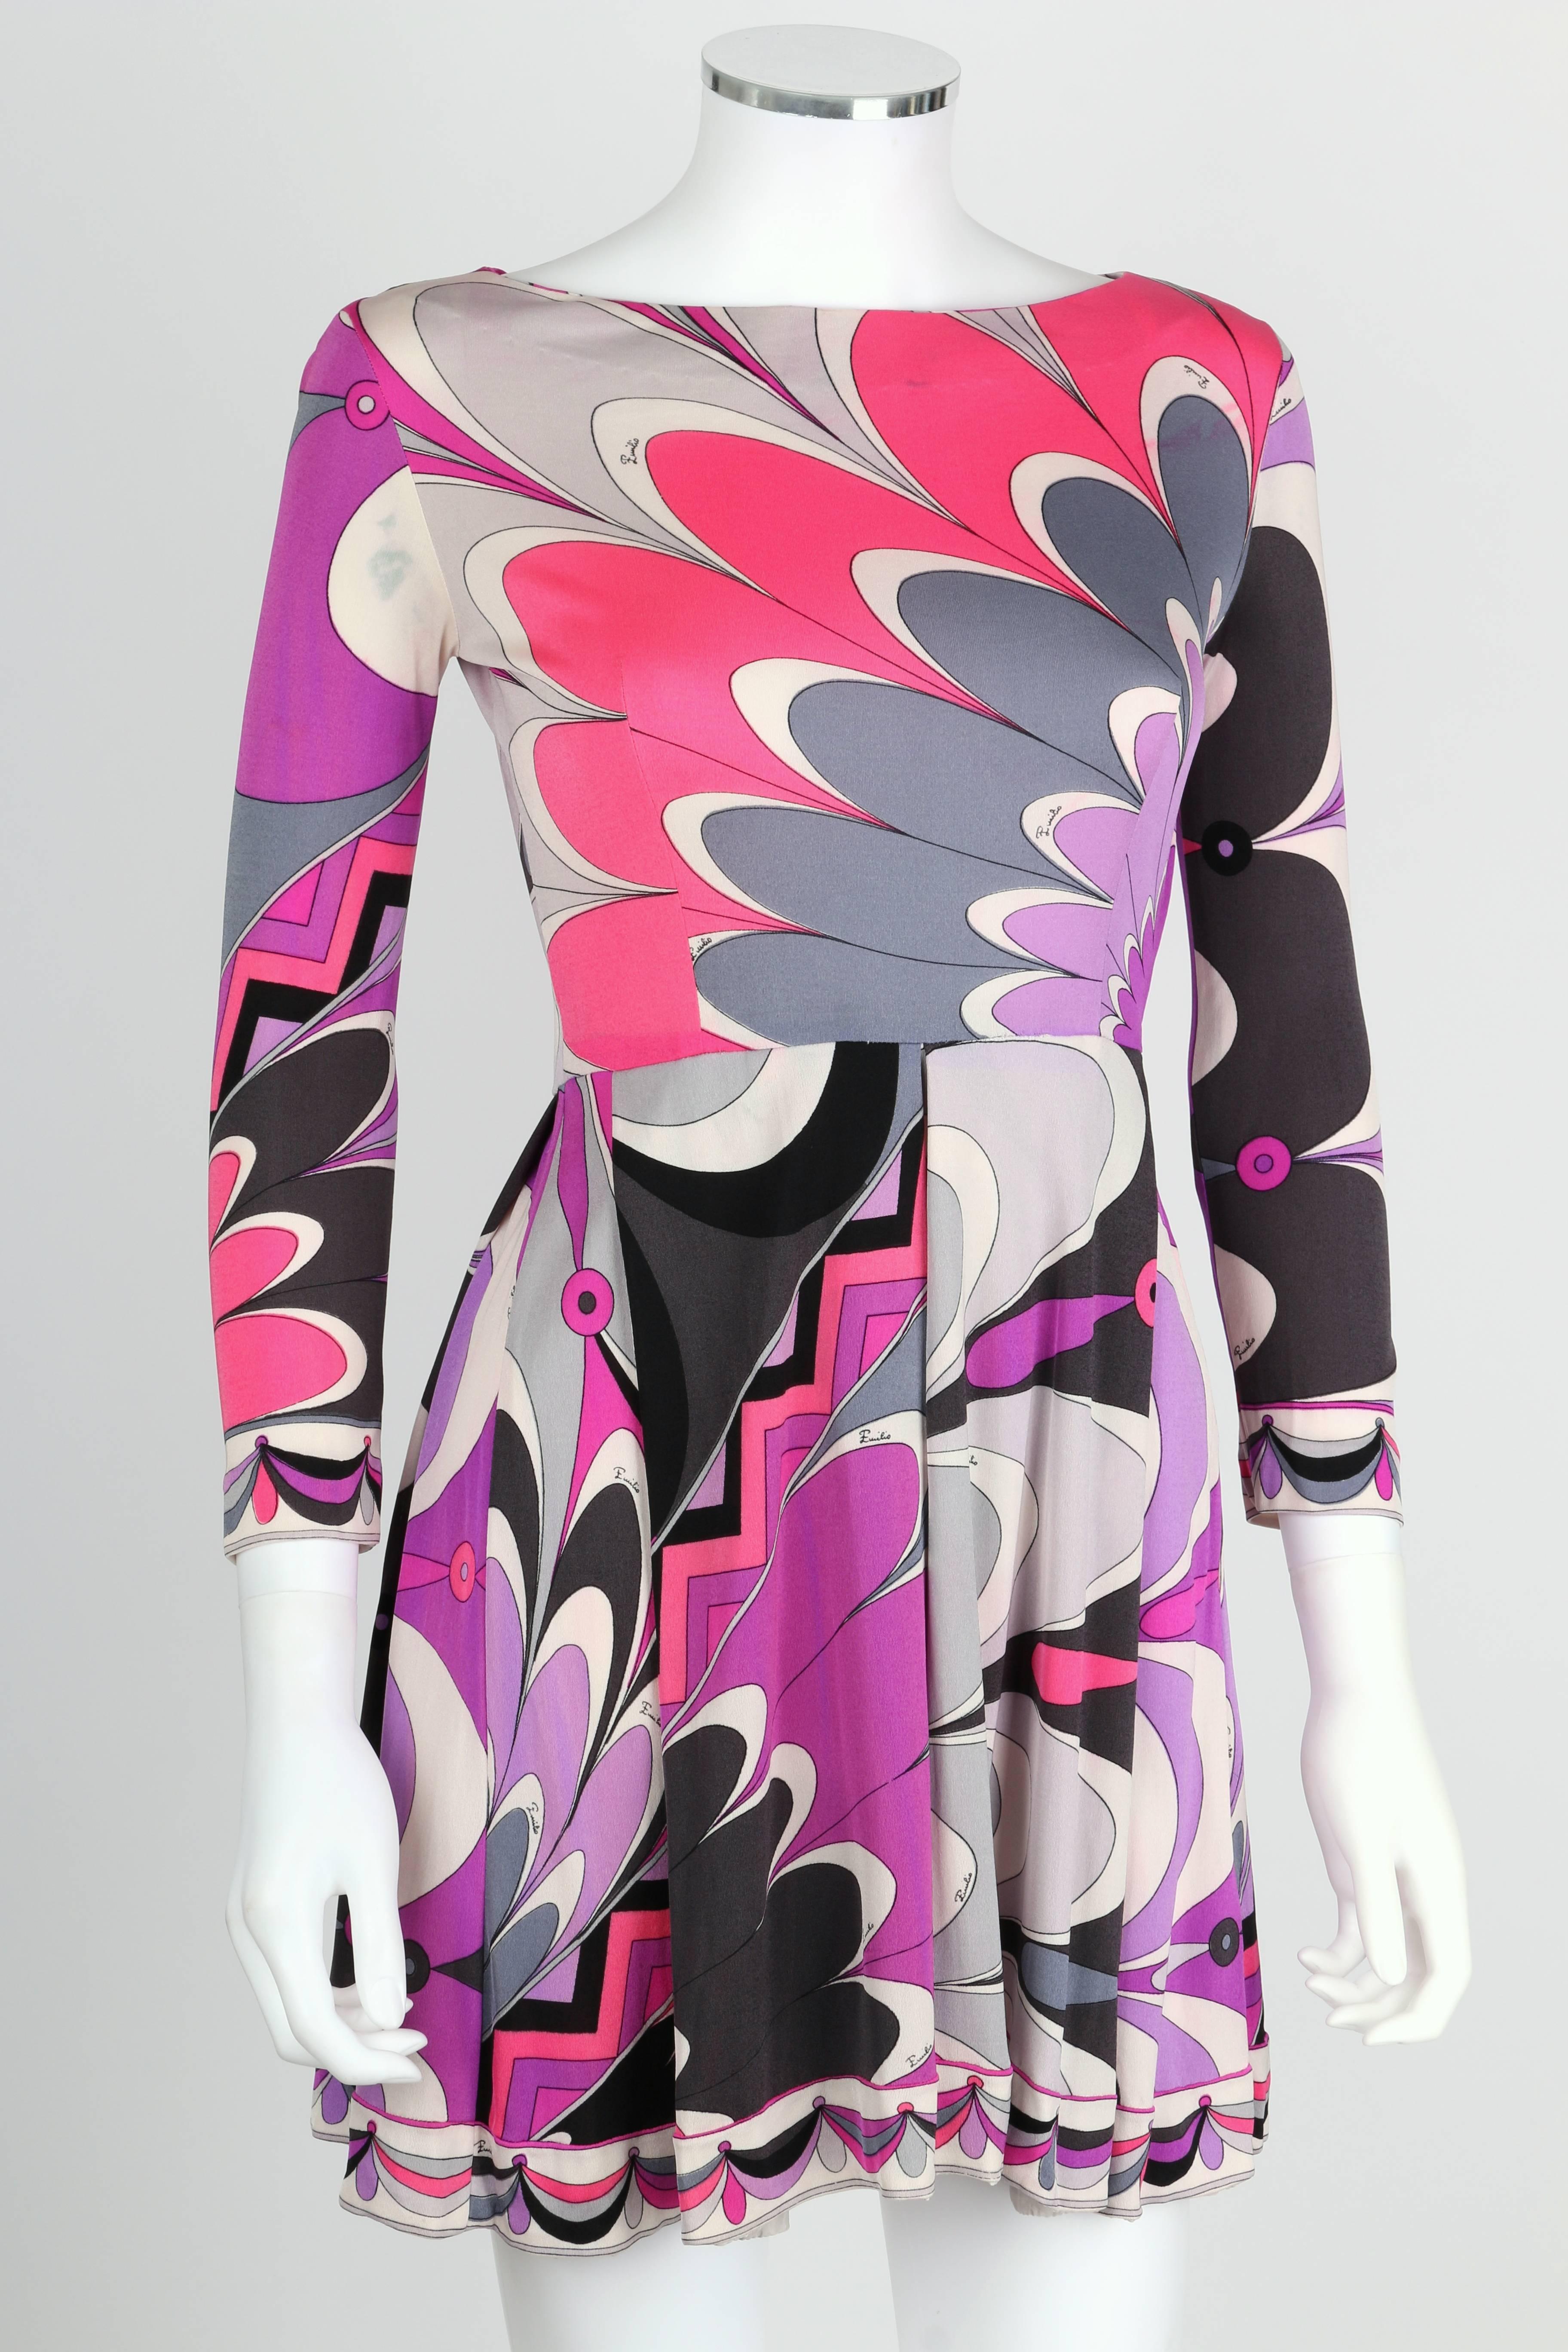 Vintage c.1960's Emilio Pucci abstract sunburst floral signature print in shades of purple, gray, black and pink silk jersey dress . Bateau neckline. 3/4 length sleeves. Skirt has large center box pleat. Side zipper closure. Marked Fabric Content: